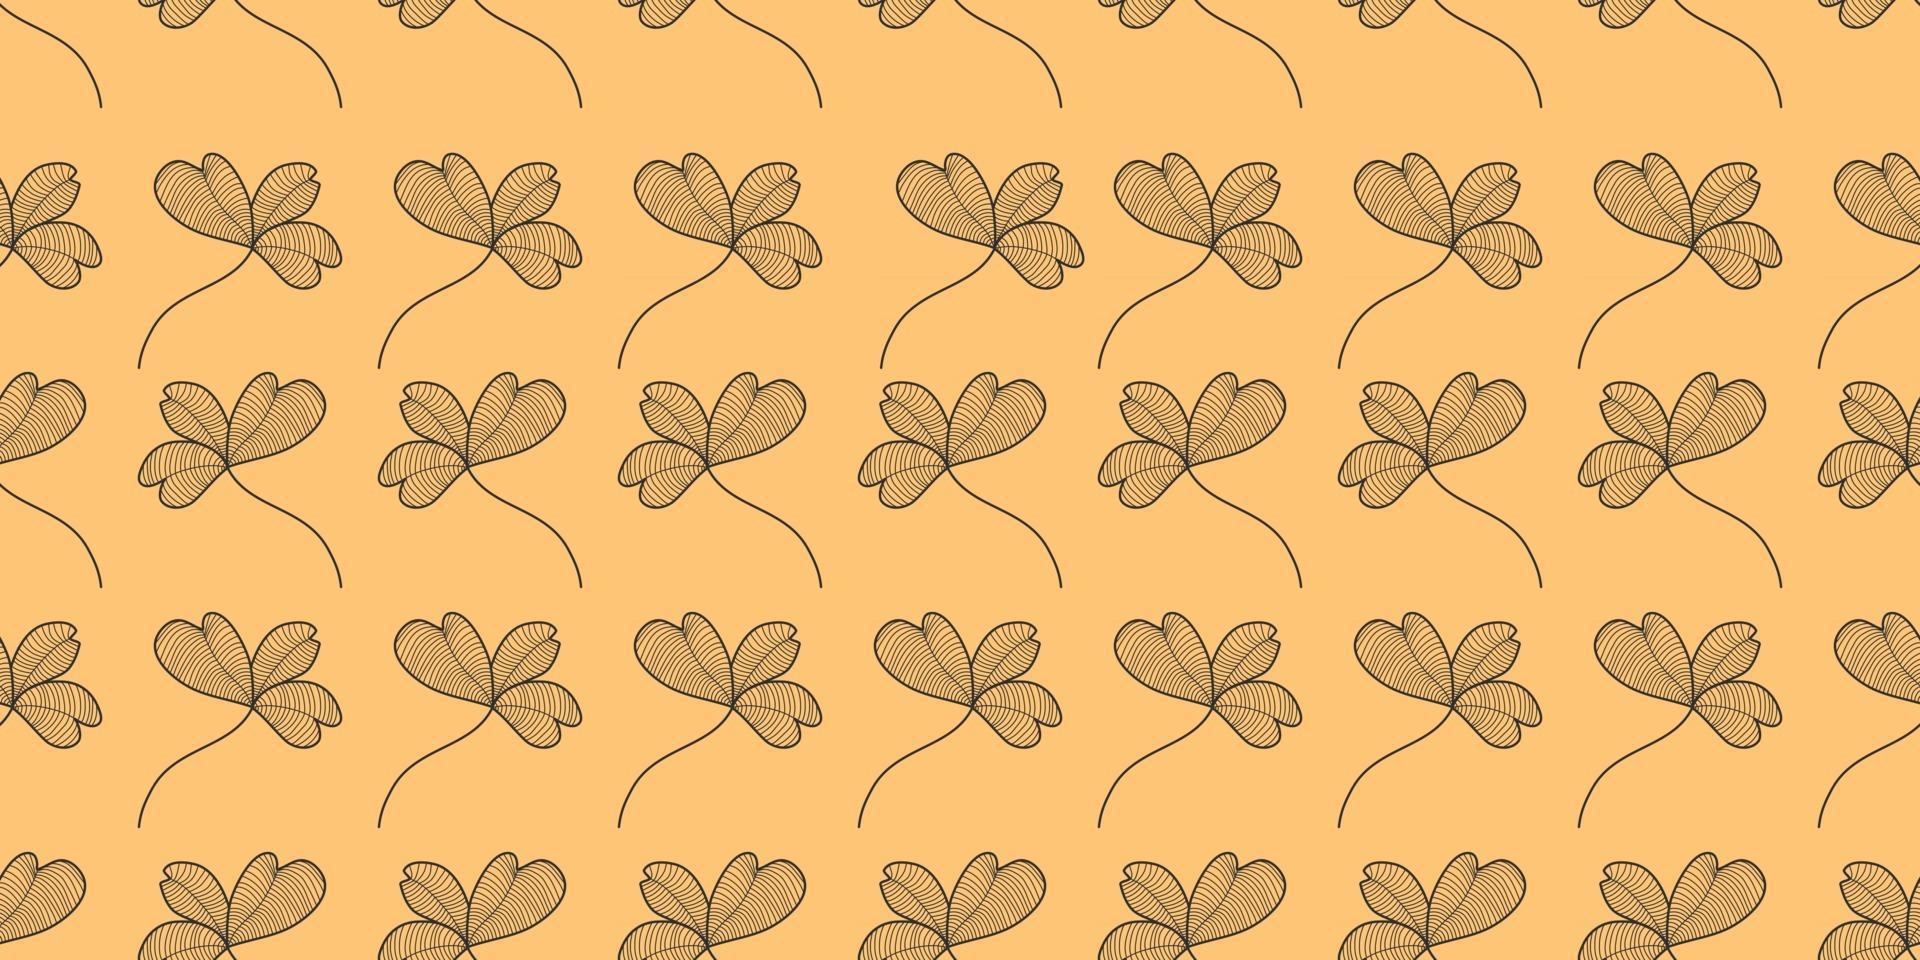 Cute floral, plant vector seamless pattern. Elegant template for fashion prints, fabric, textile, wallpaper, wall art, invitation, packaging. Ready to use